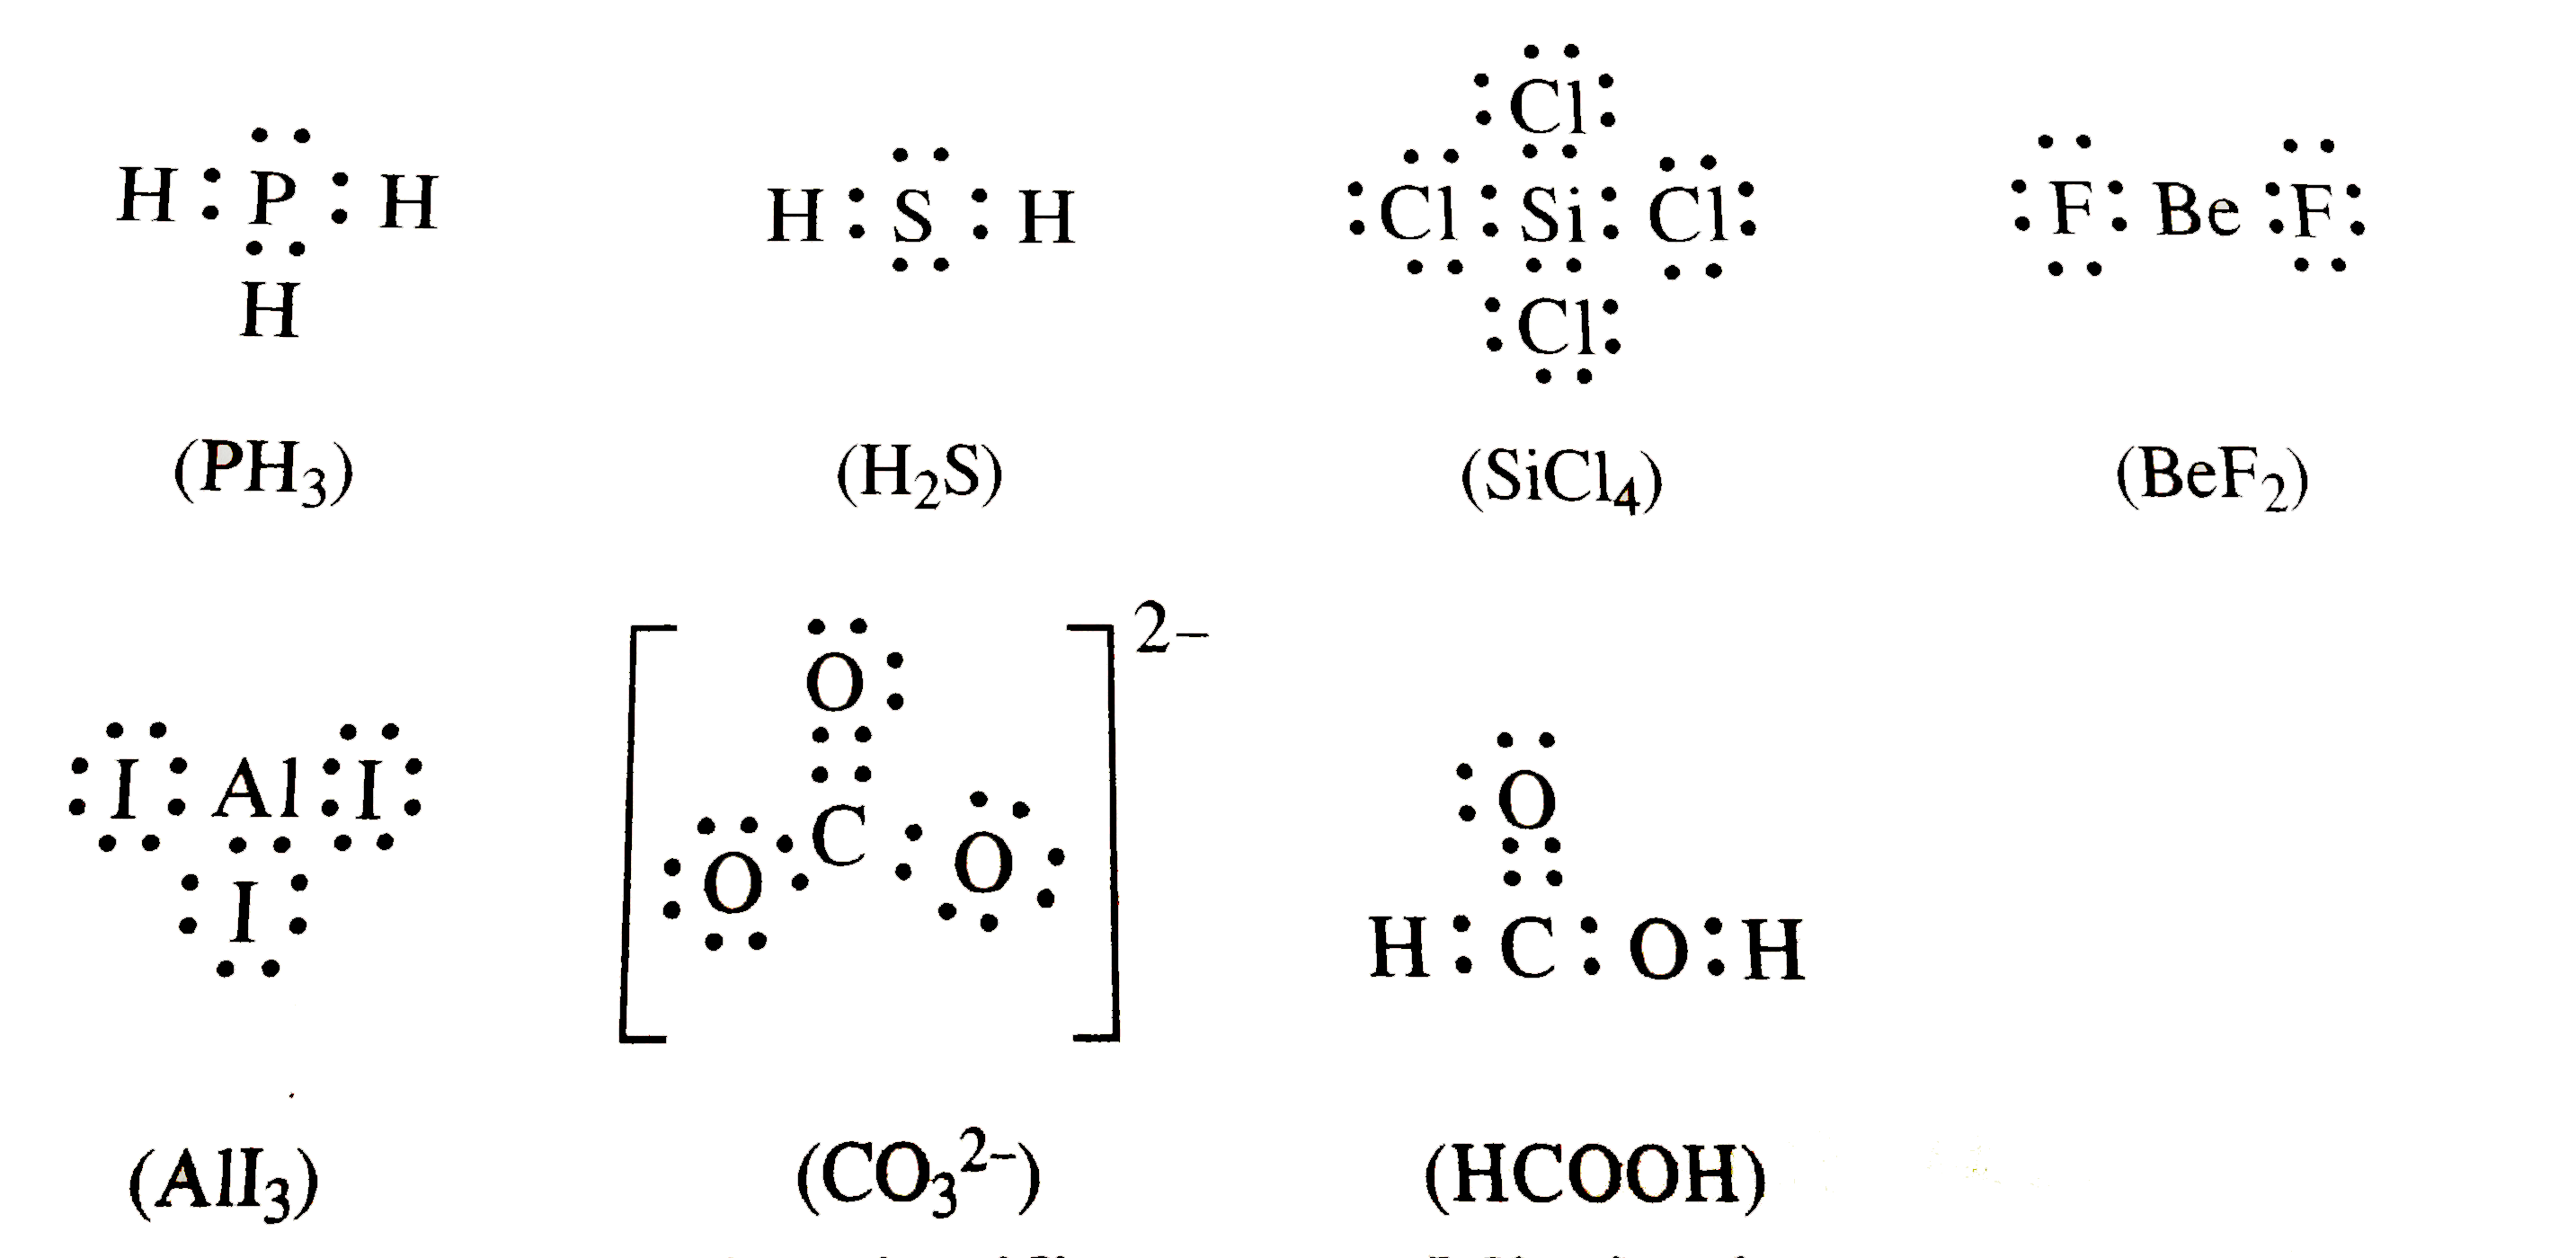 Bef lewis structure